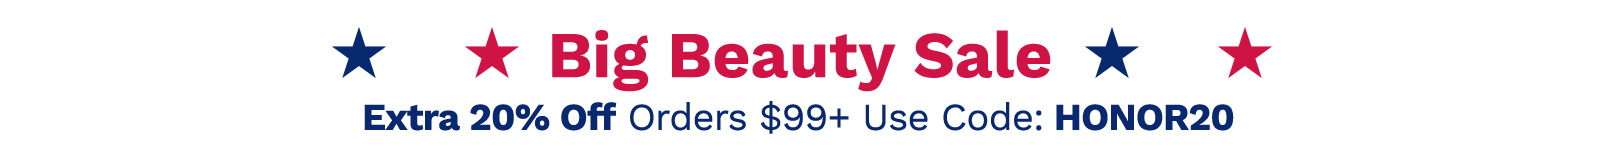 Big Beauty Sale | Extra 20% Off Orders $99+ Use Code: HONOR20